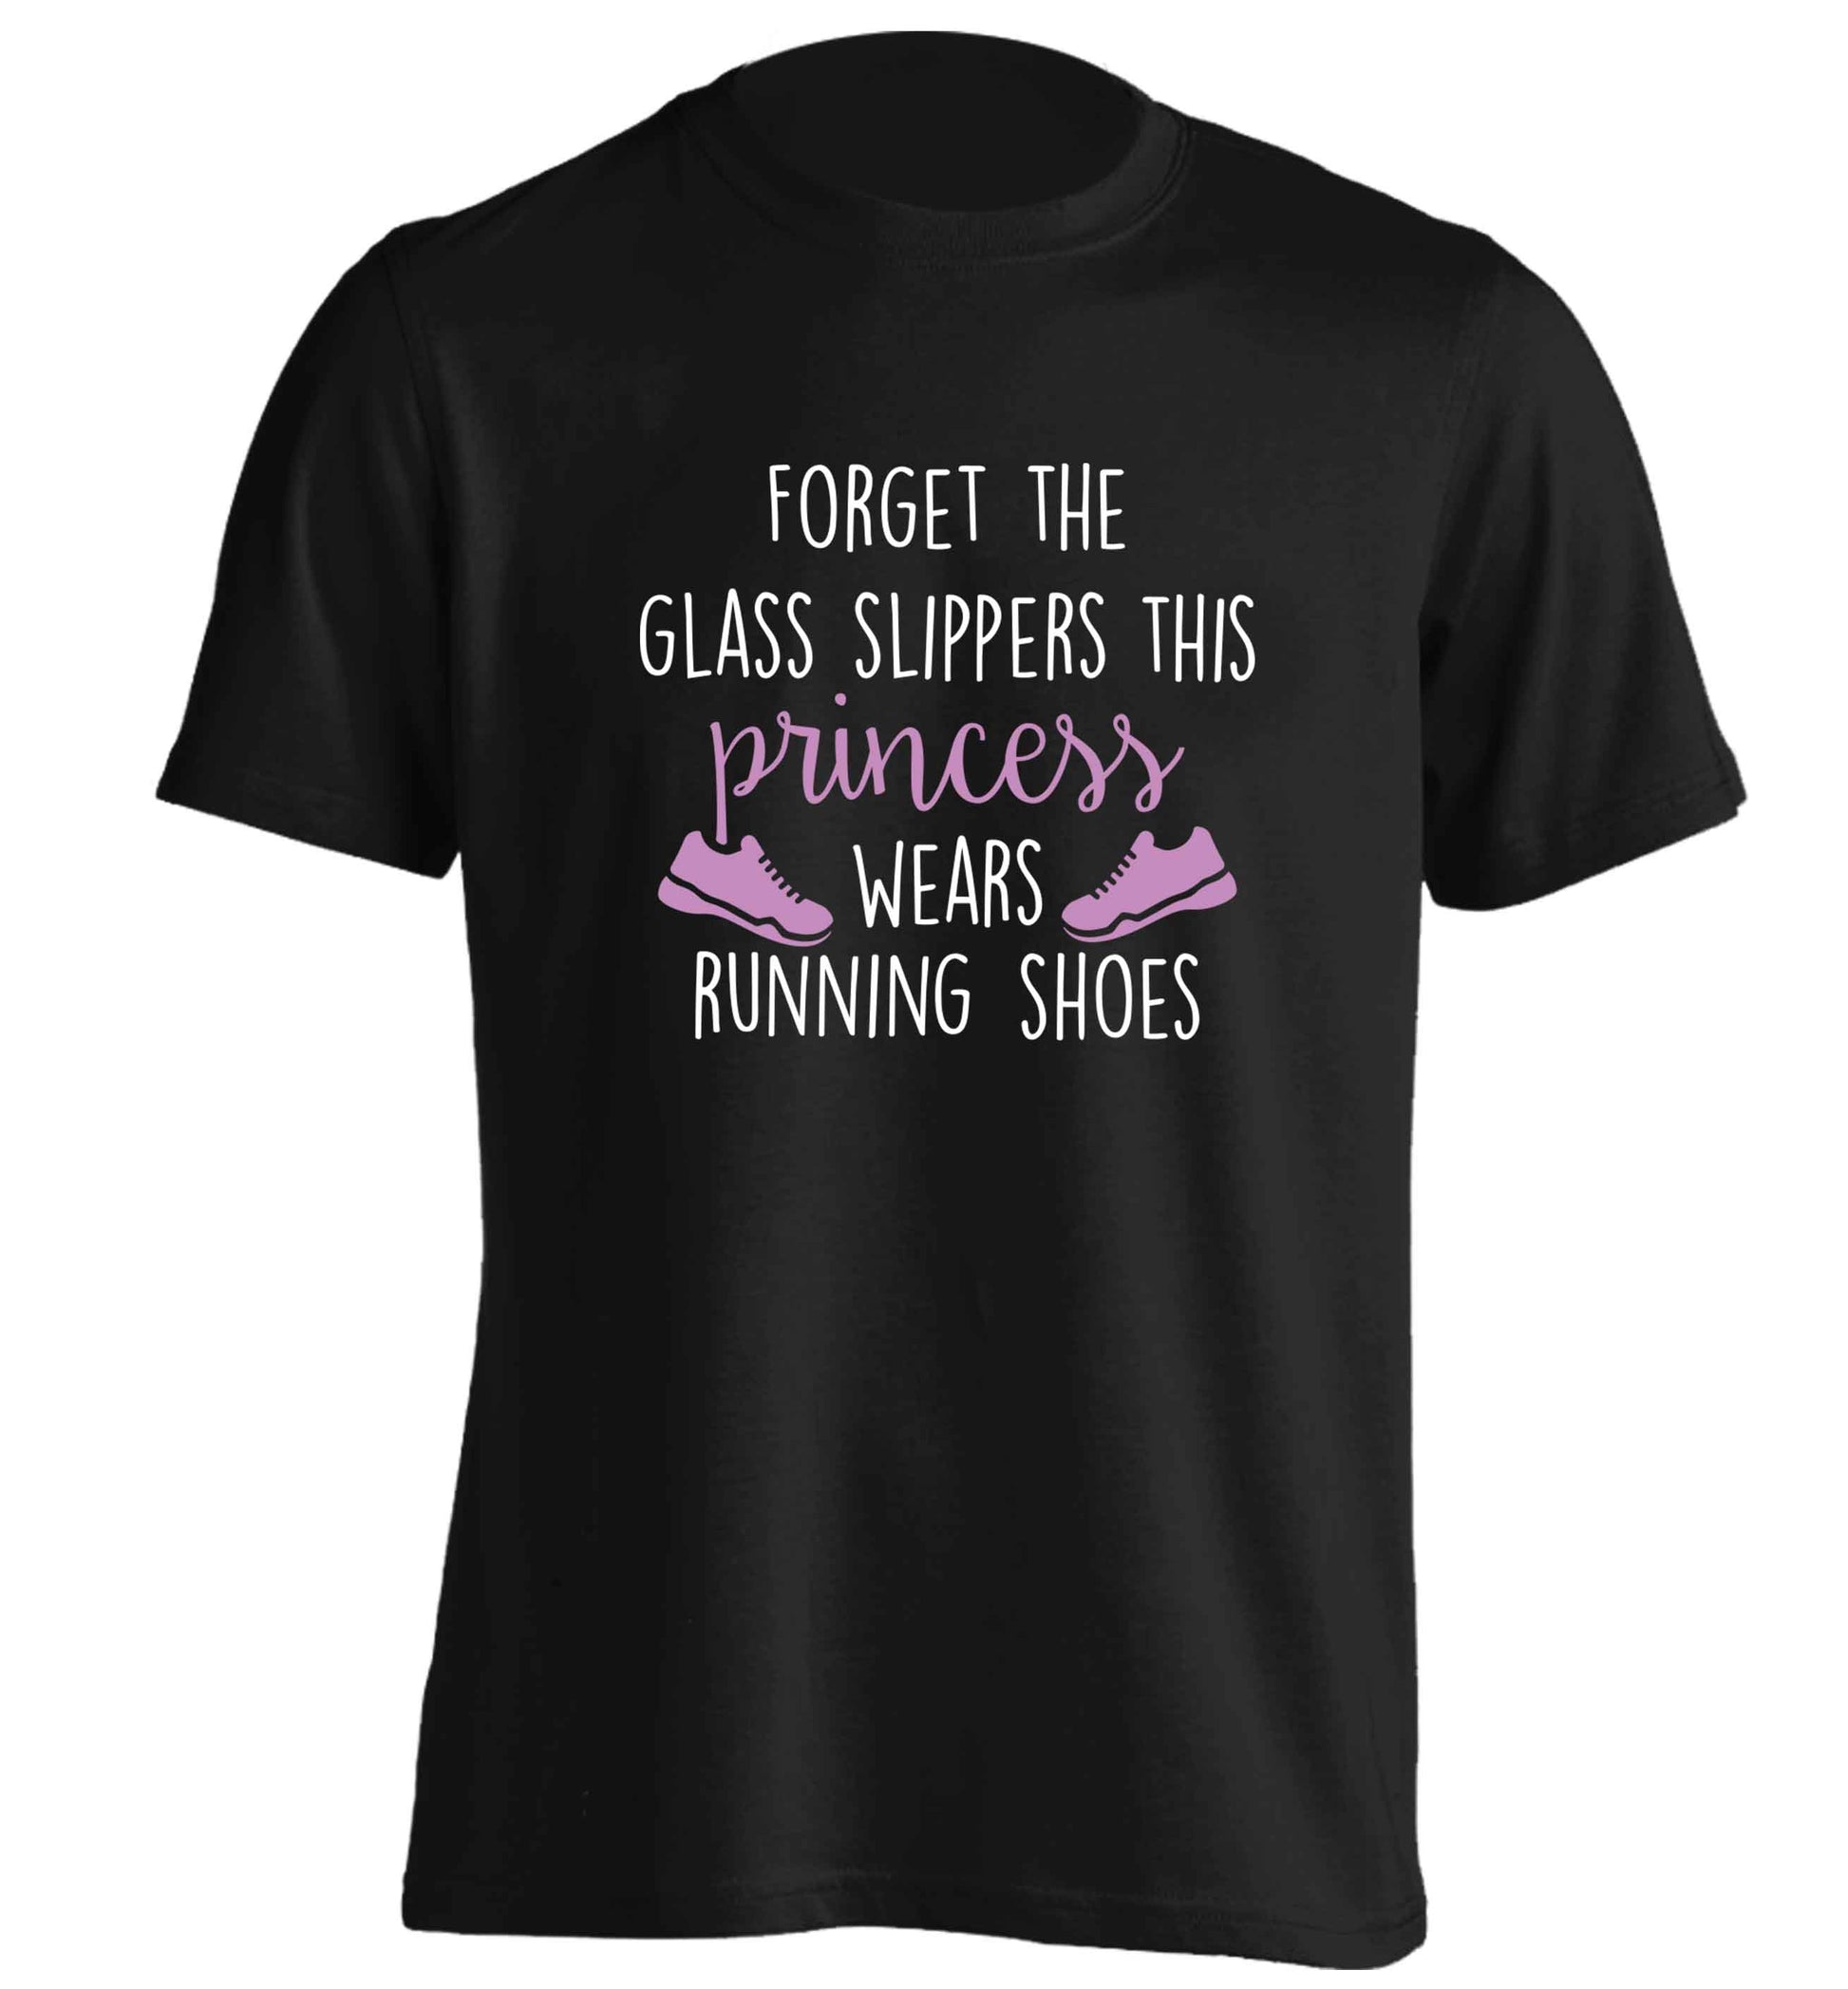 Forget the glass slippers this princess wears running shoes adults unisex black Tshirt 2XL